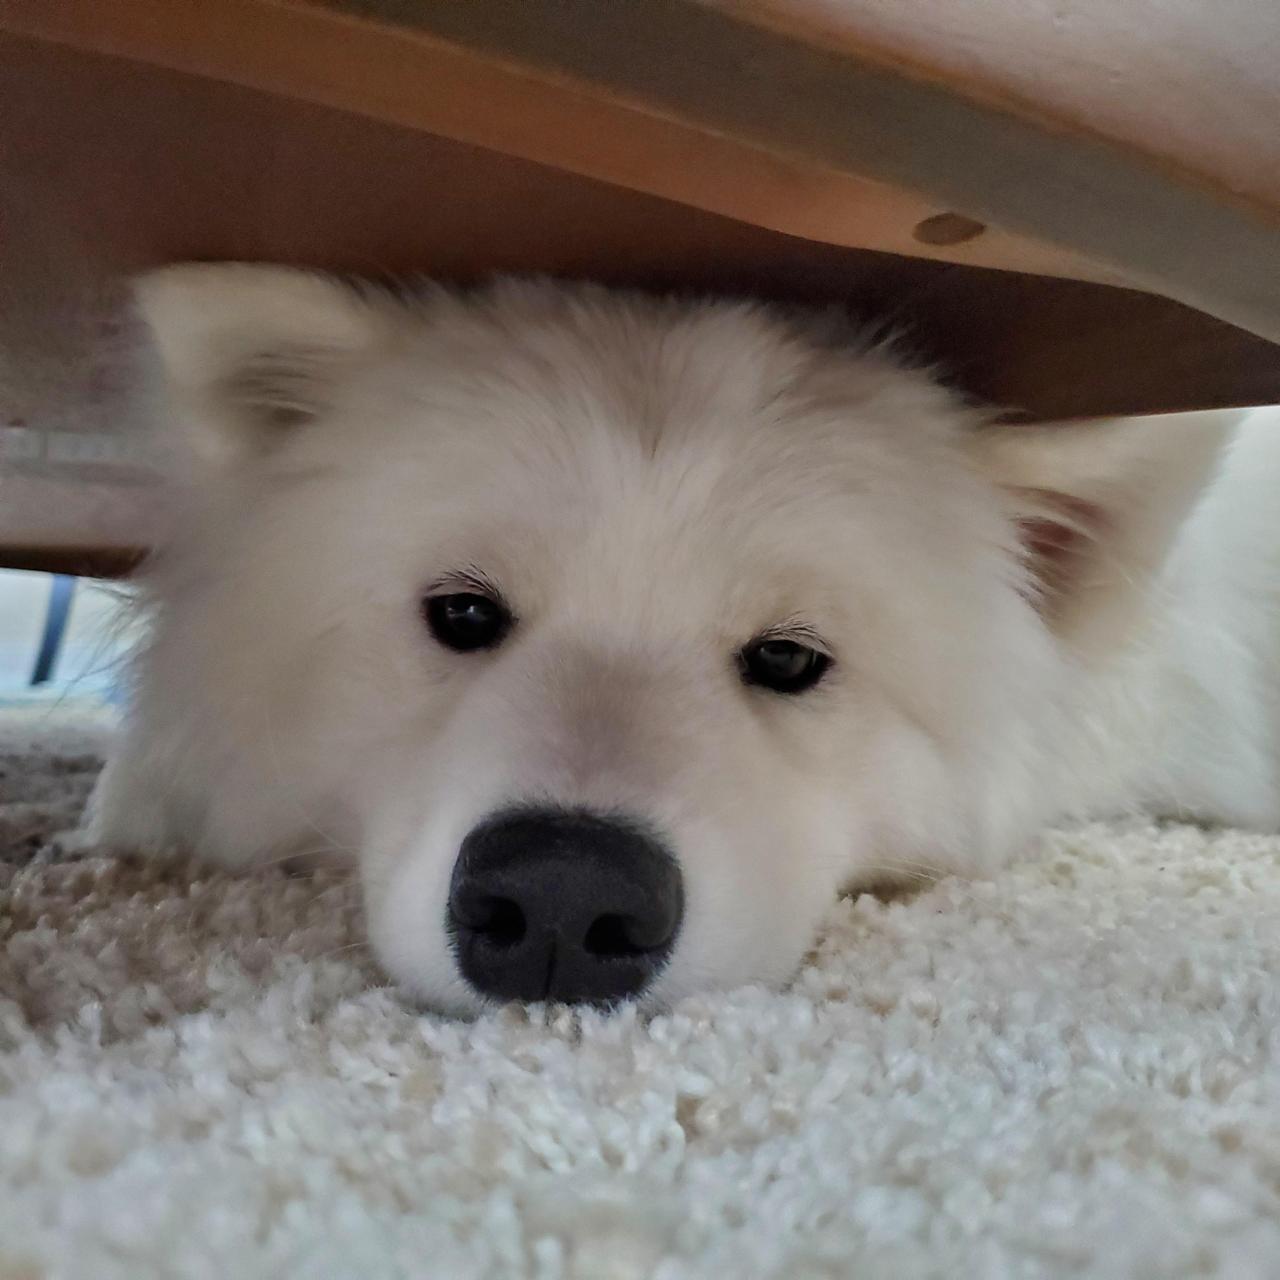 Miku is sad that she has outgrown laying under the table